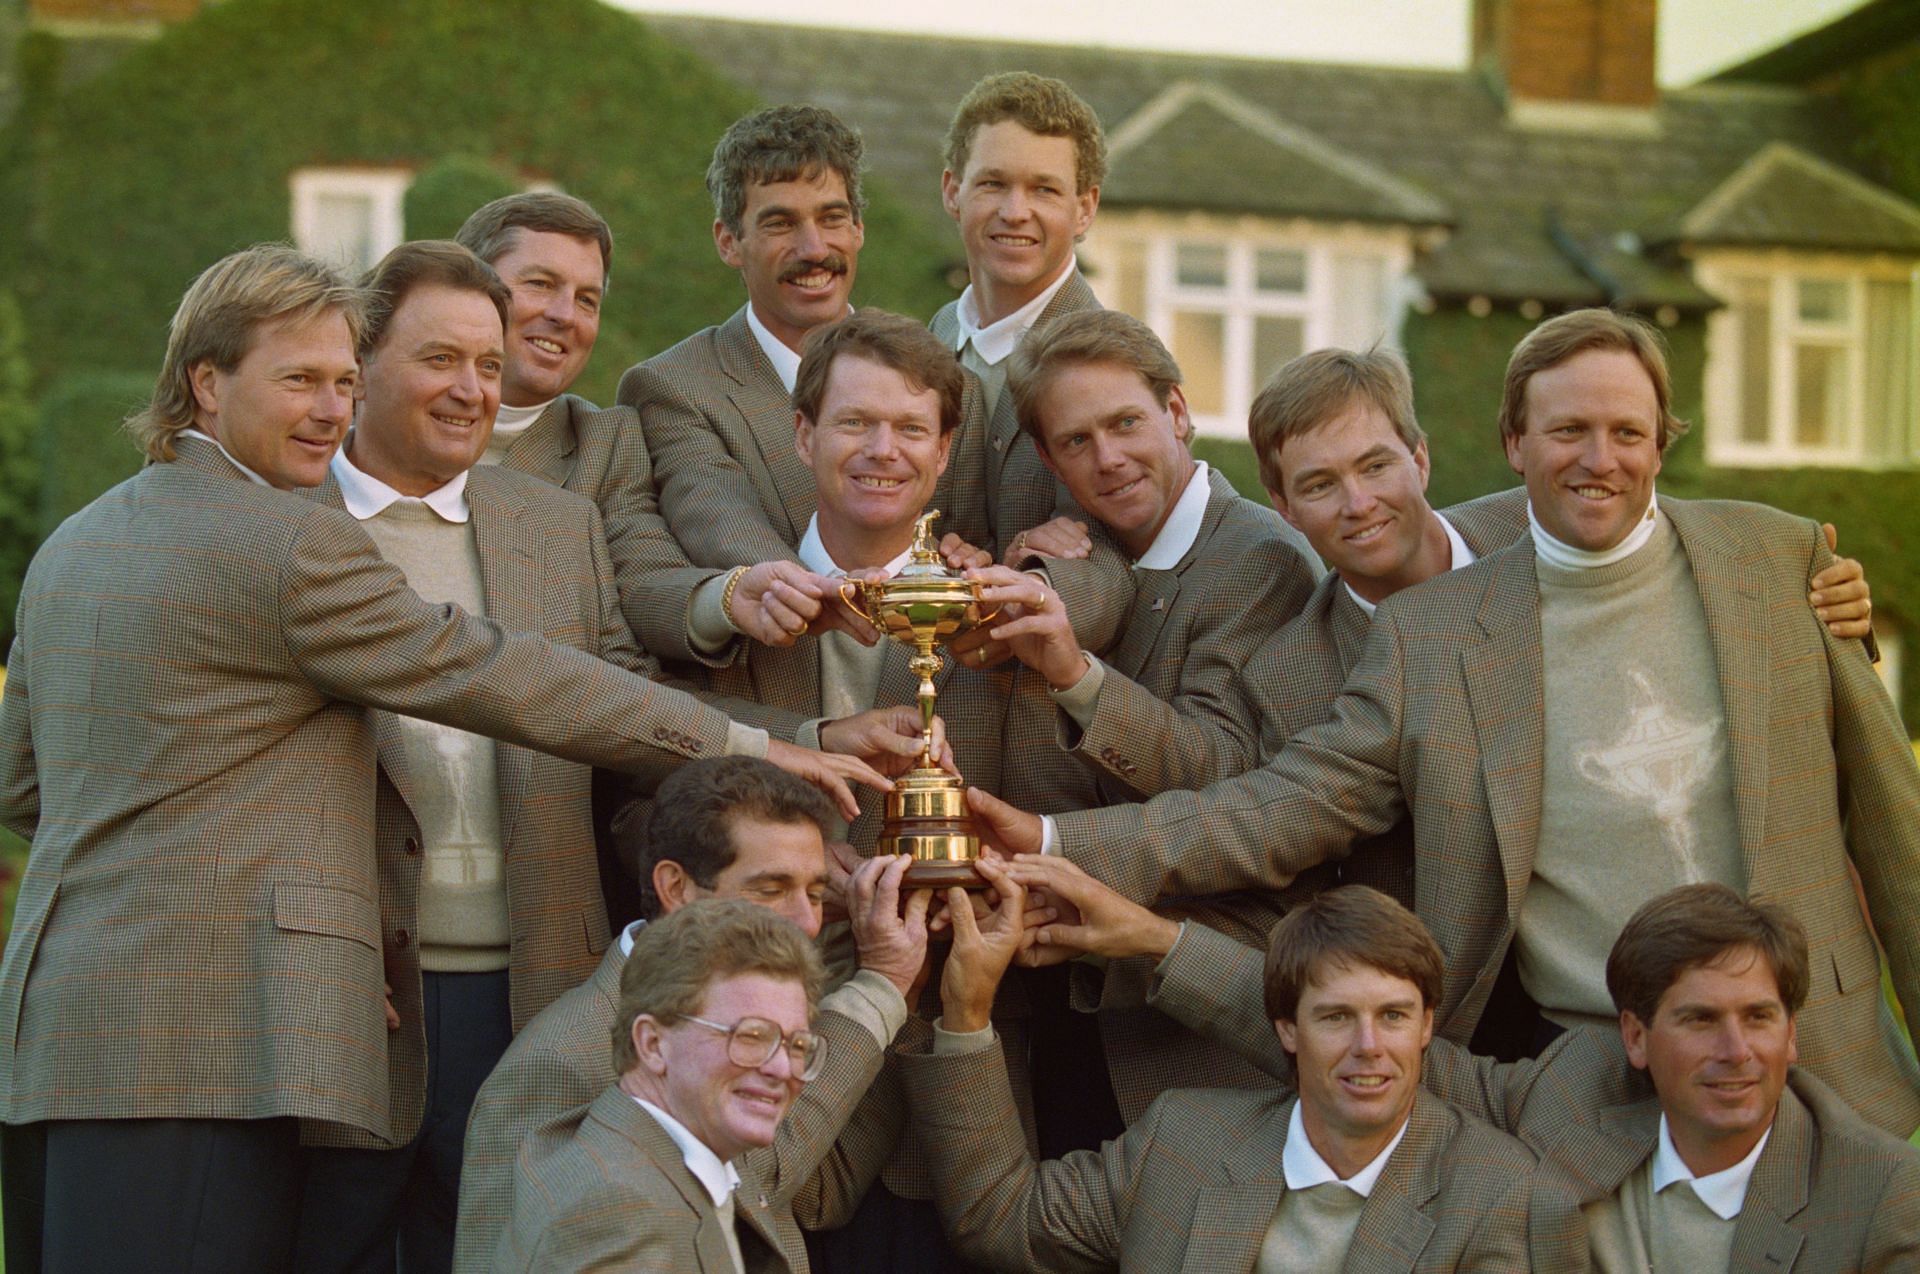 Team USA in the 30th Ryder Cup 1993 (Image via Getty)